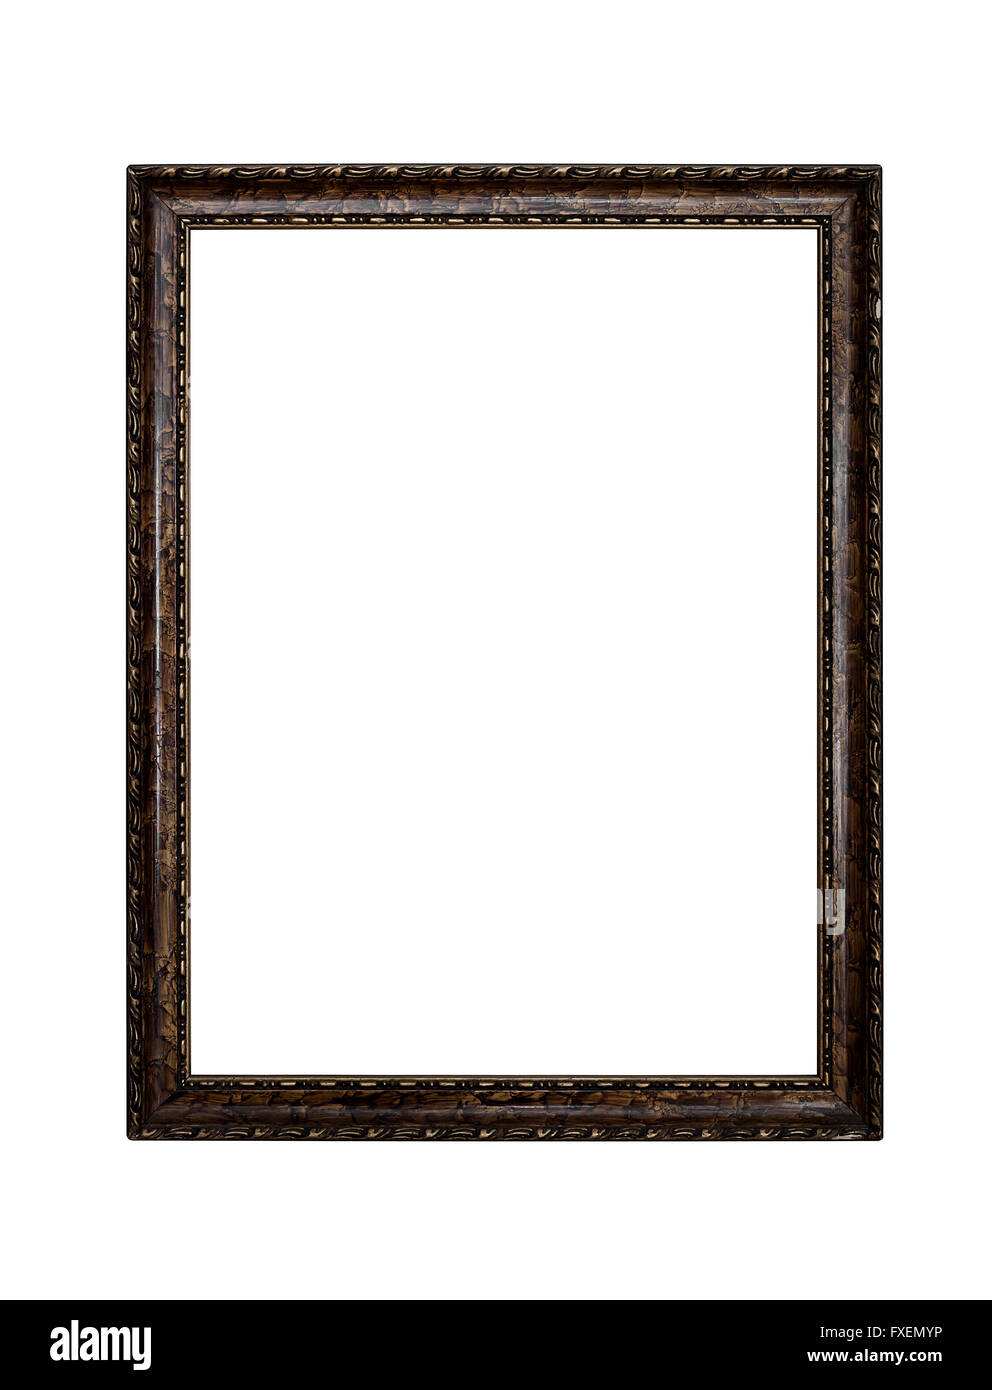 Old picture frame isolated on white background. Stock Photo